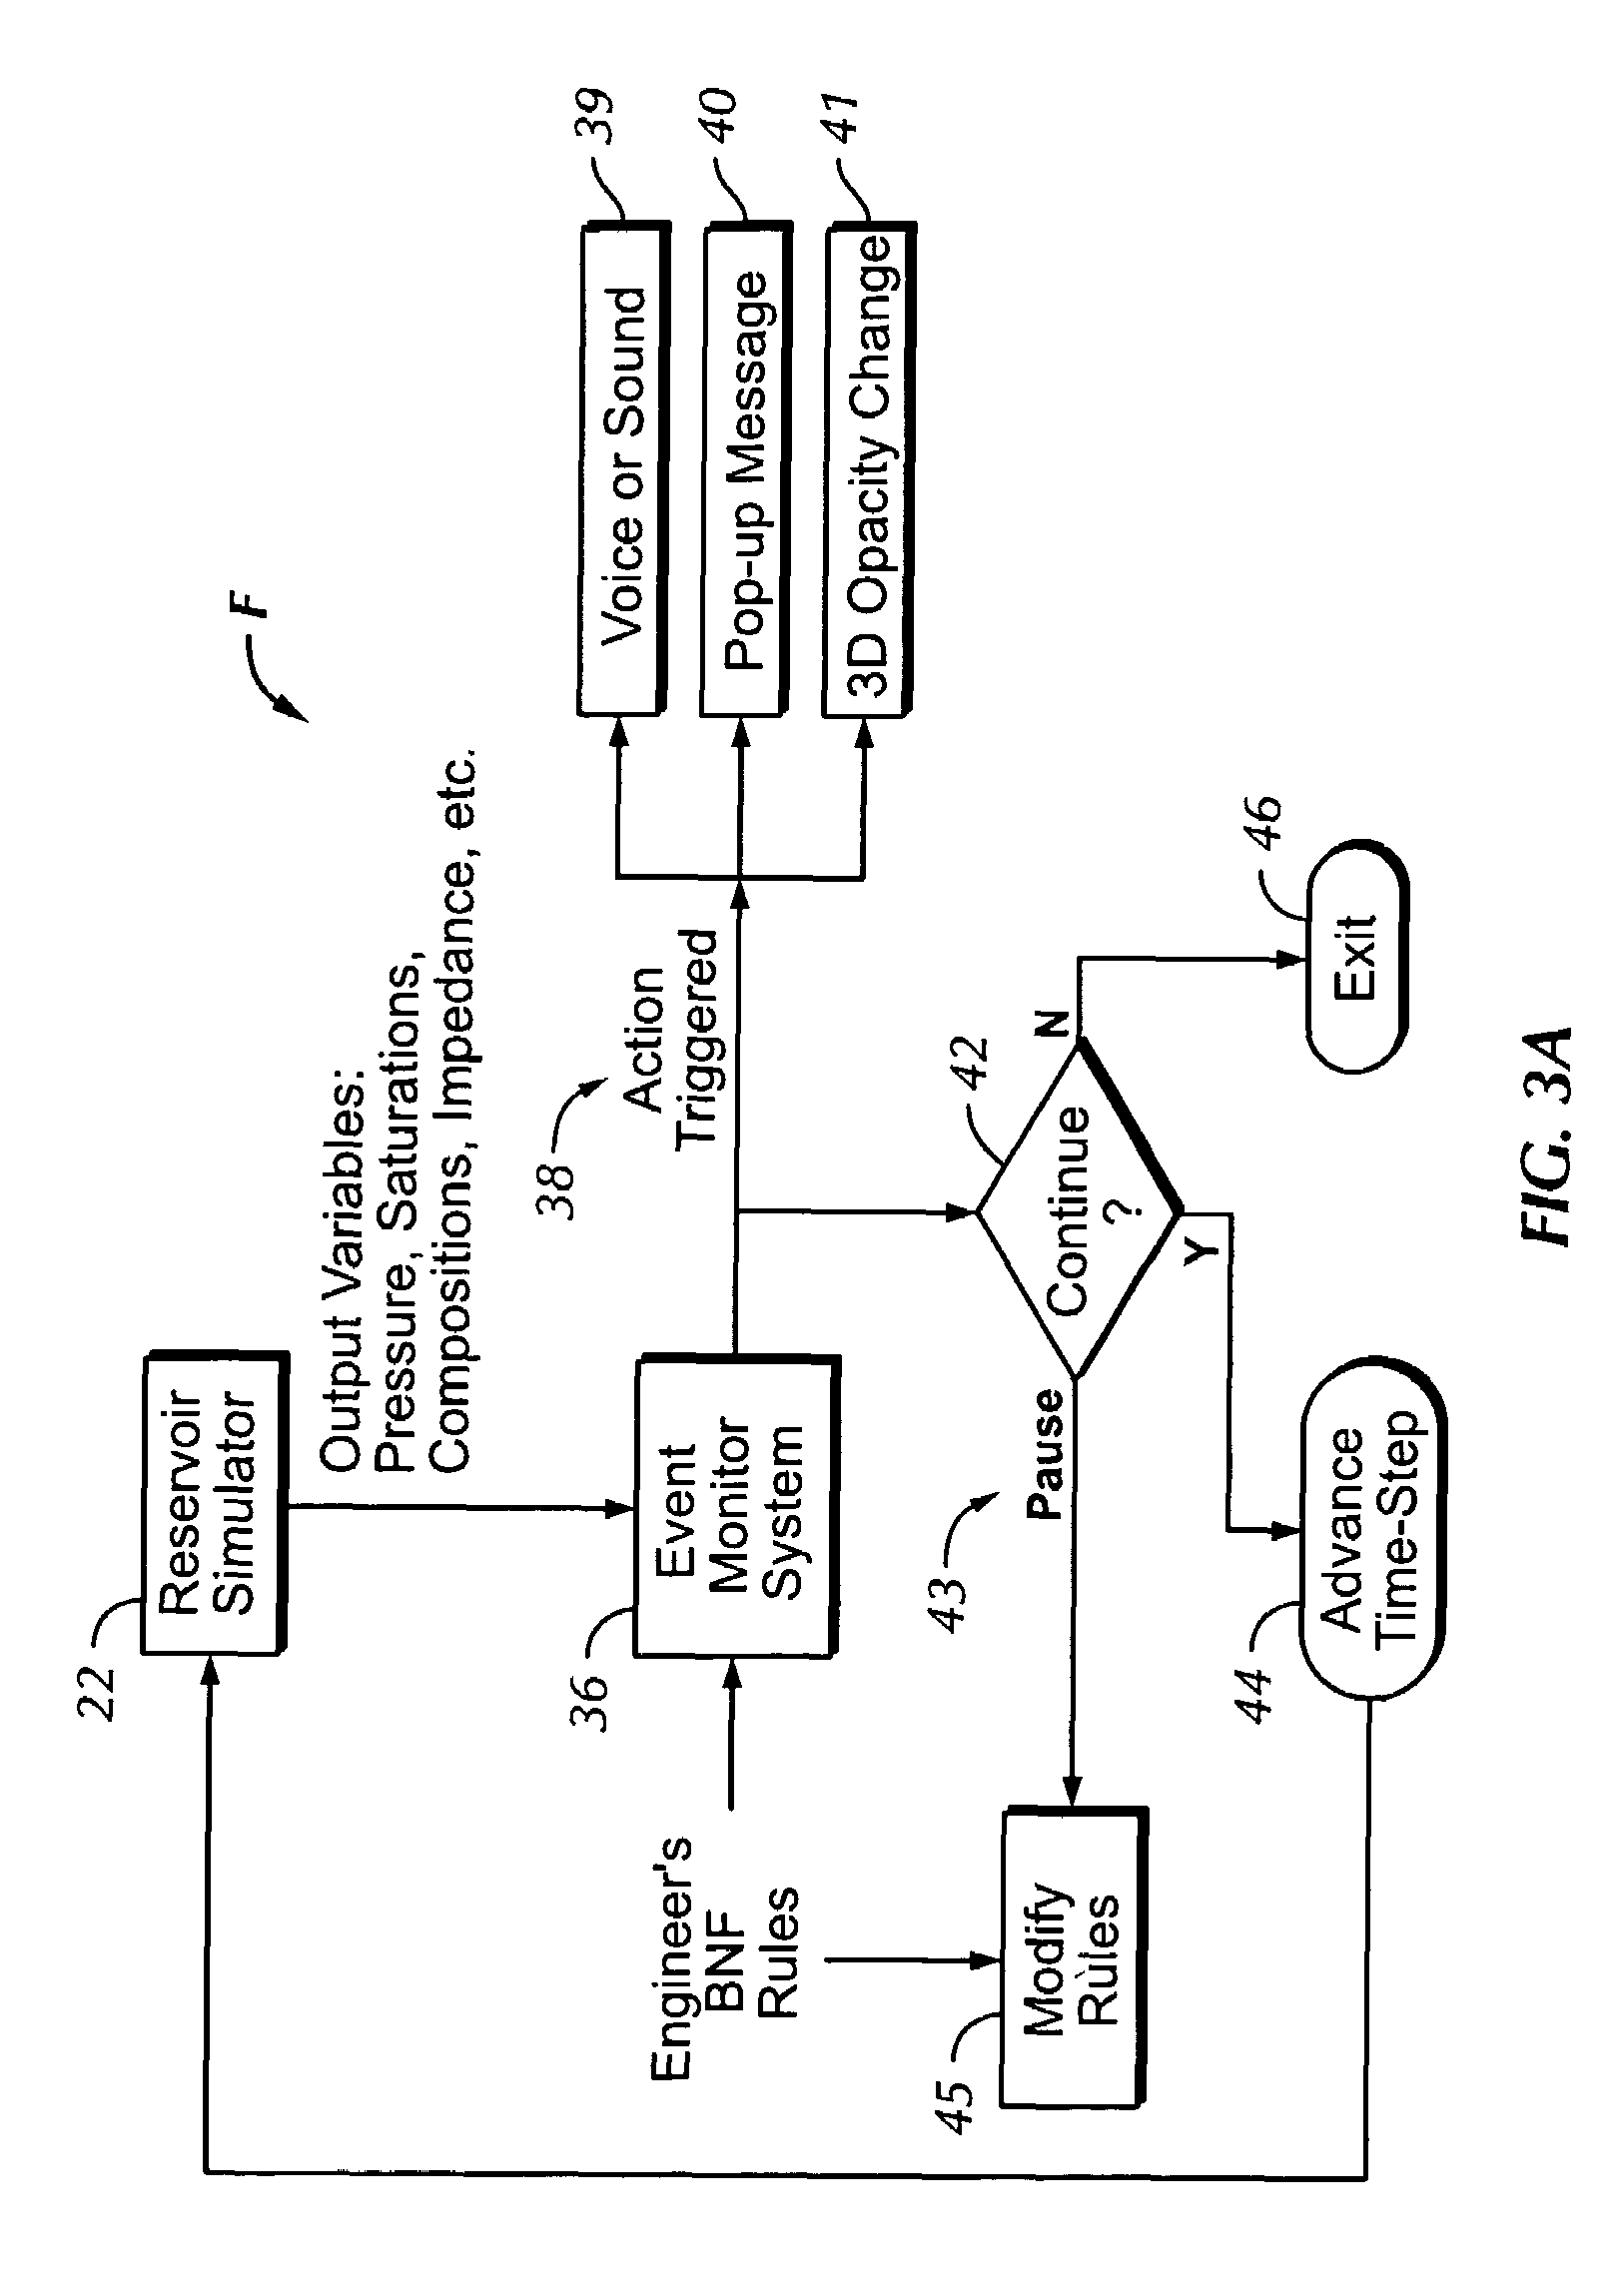 Automated event monitoring system for online reservoir simulation